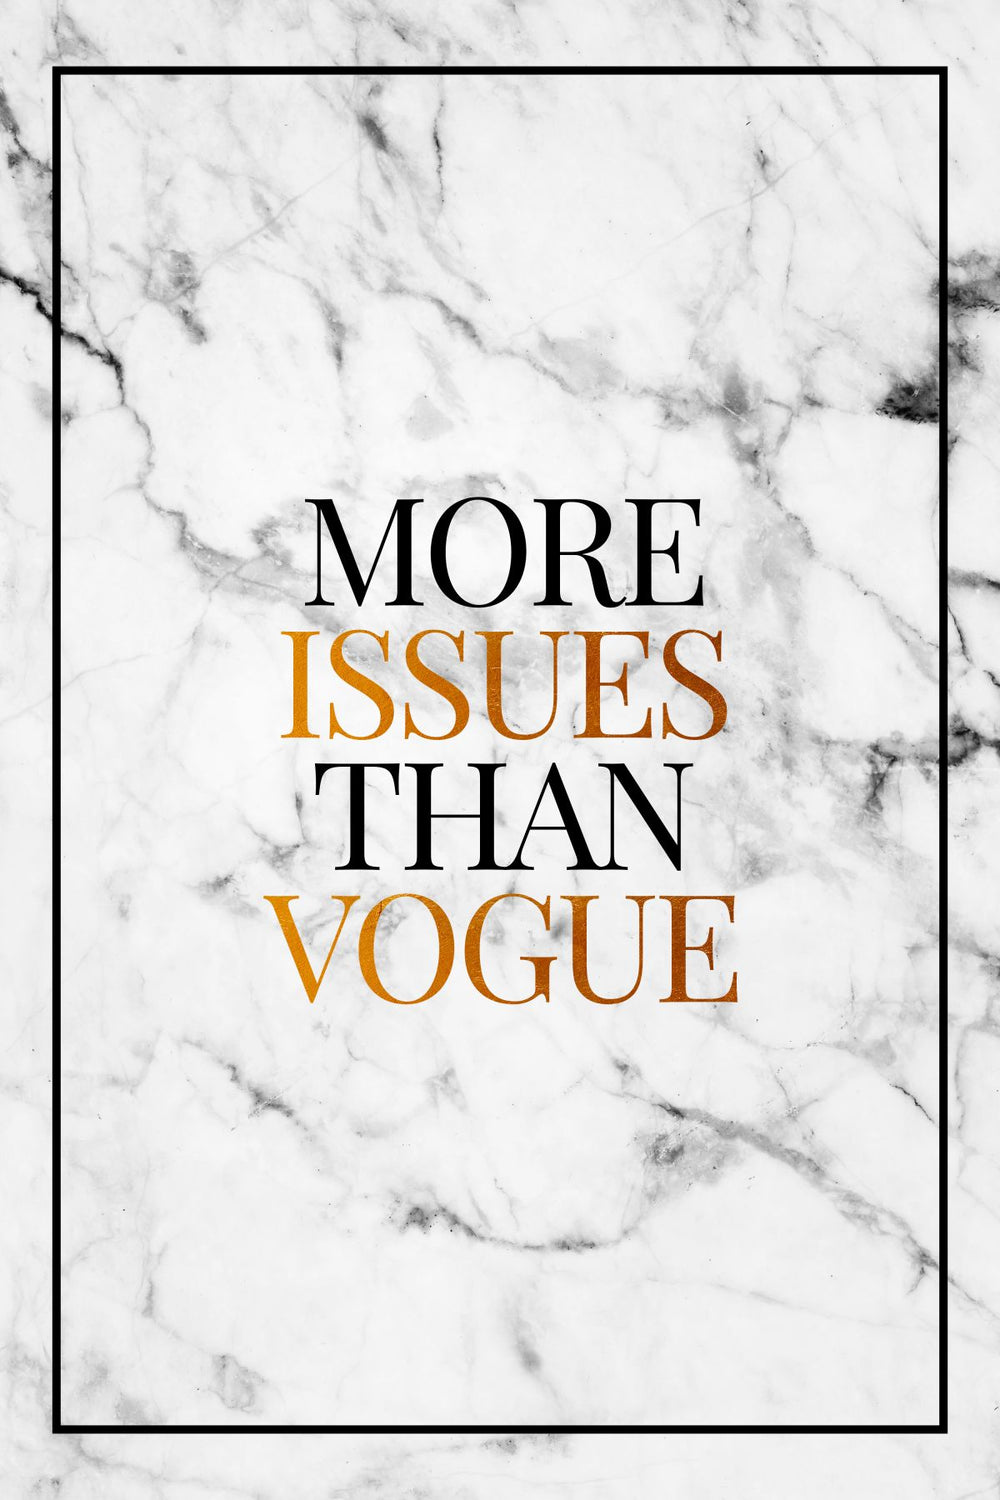 Issues Than Vogue